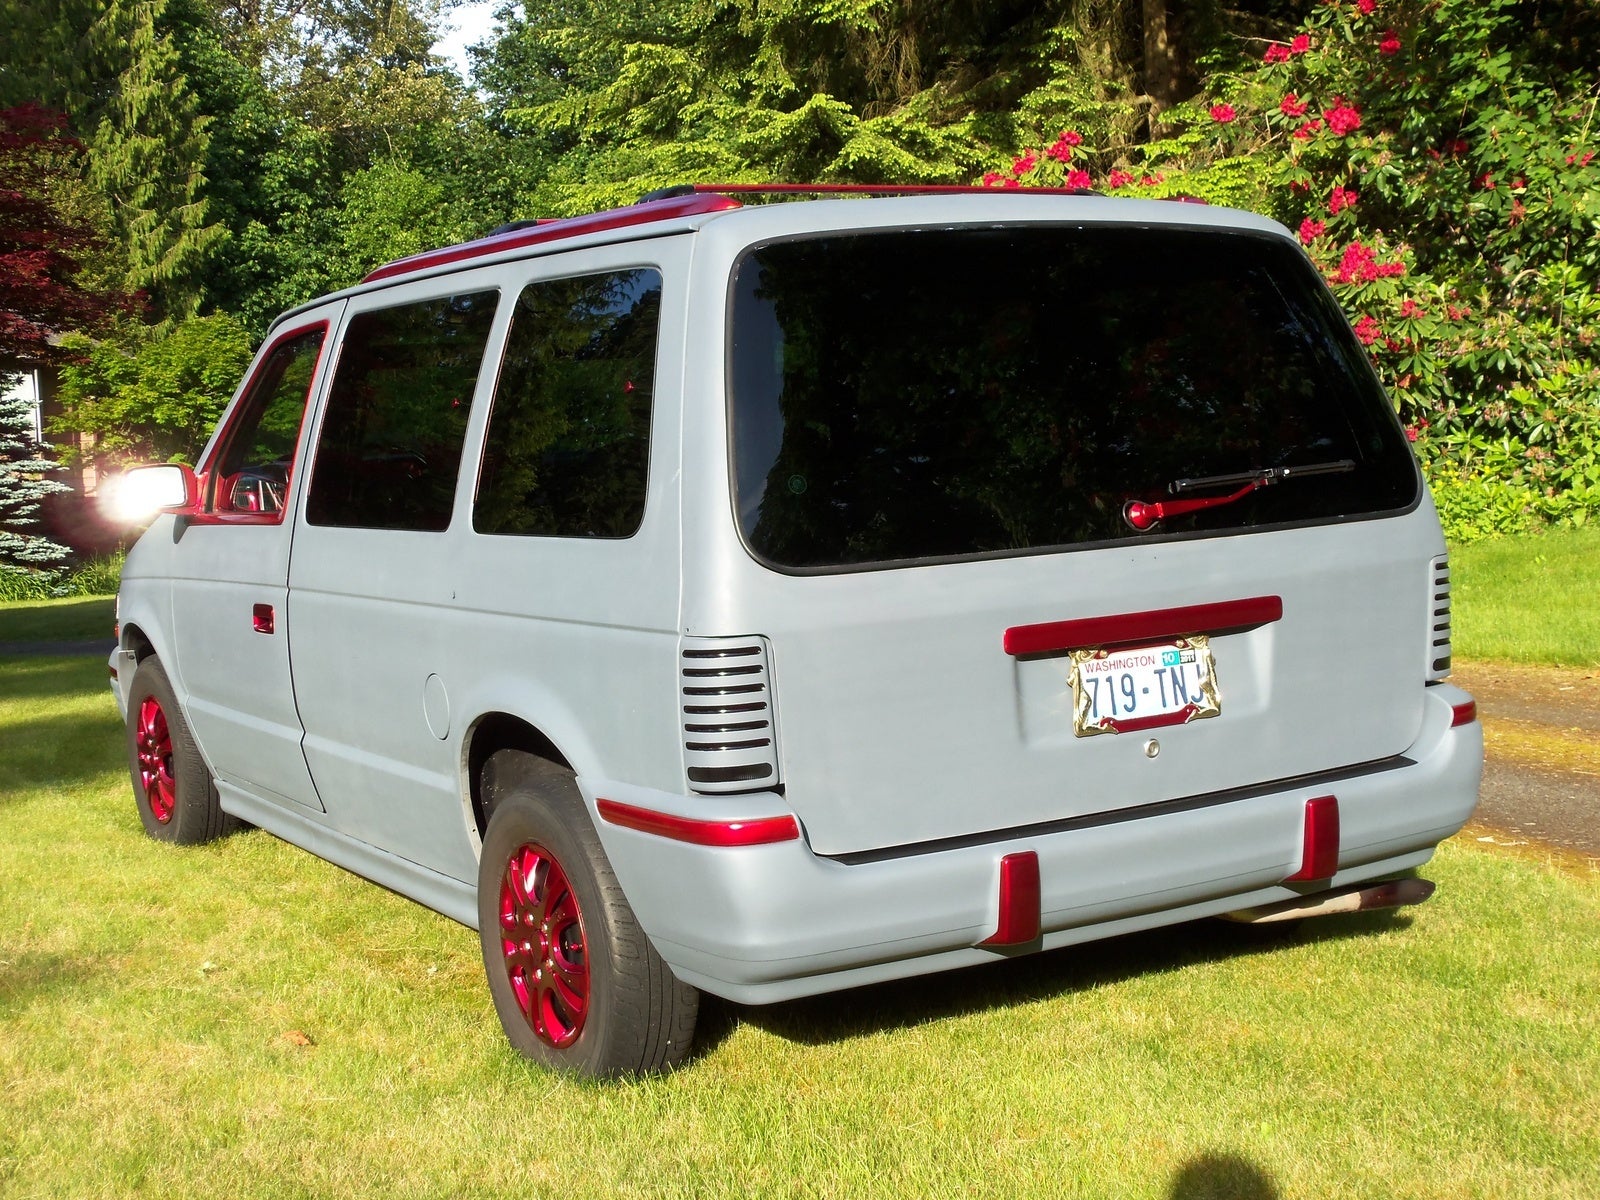 1992 plymouth voyager